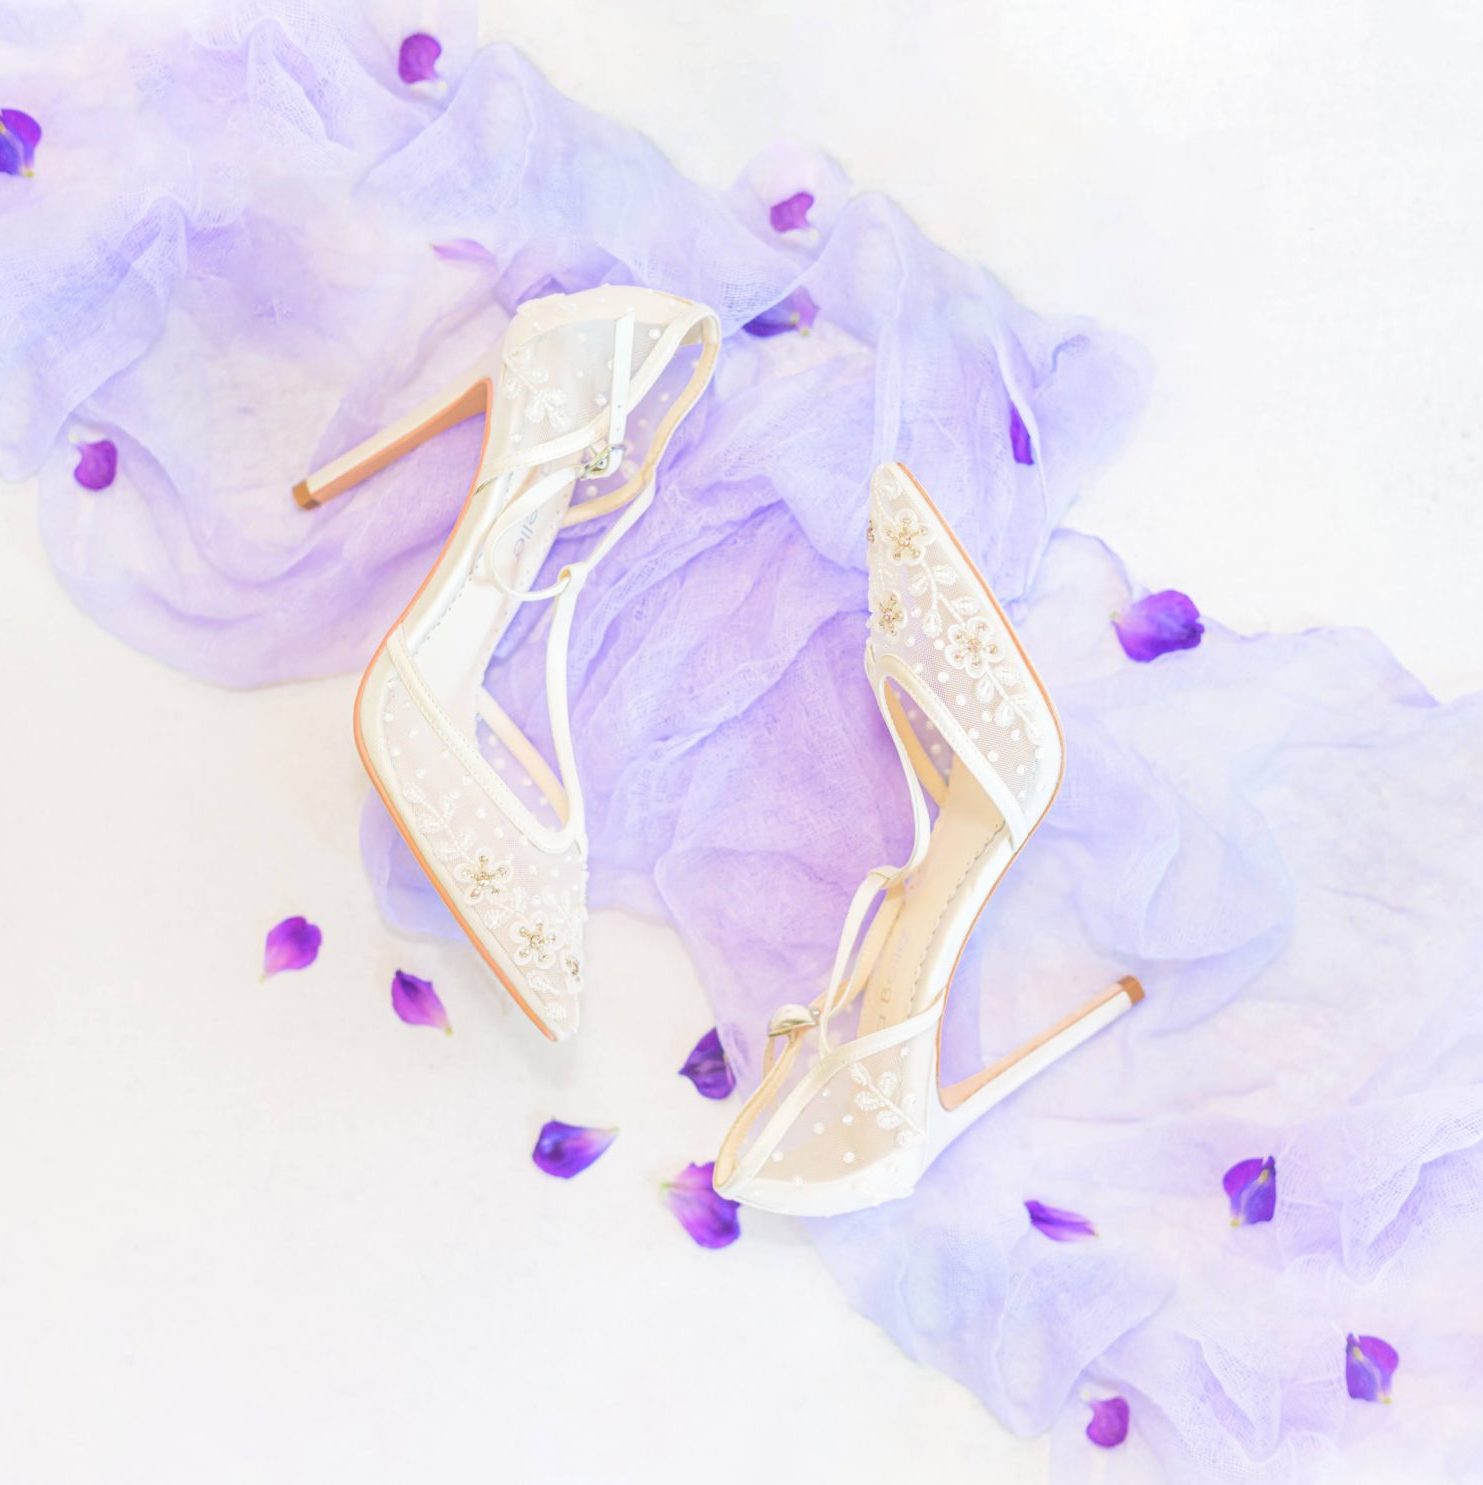 Wedding shoes lying on top of purple ribbon with flower petals scattered around.